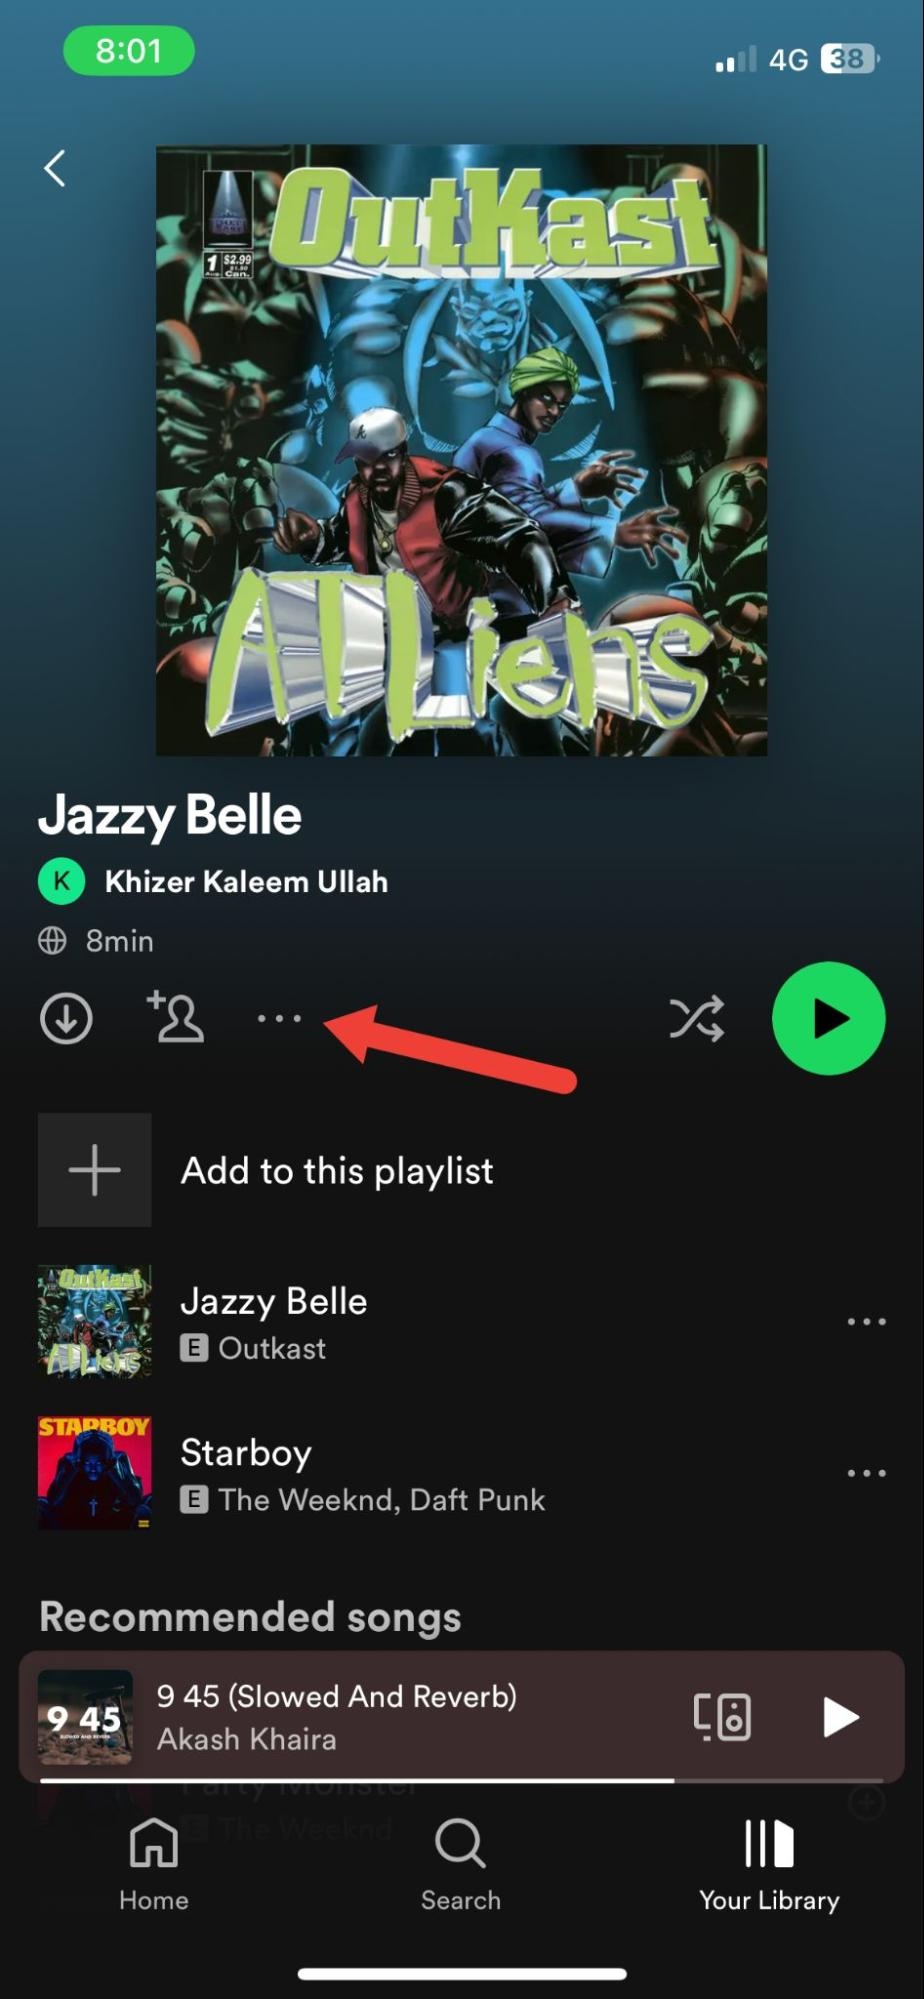 How To EASILY Make A Spotify Playlist Public/Private (& Create Playlists)